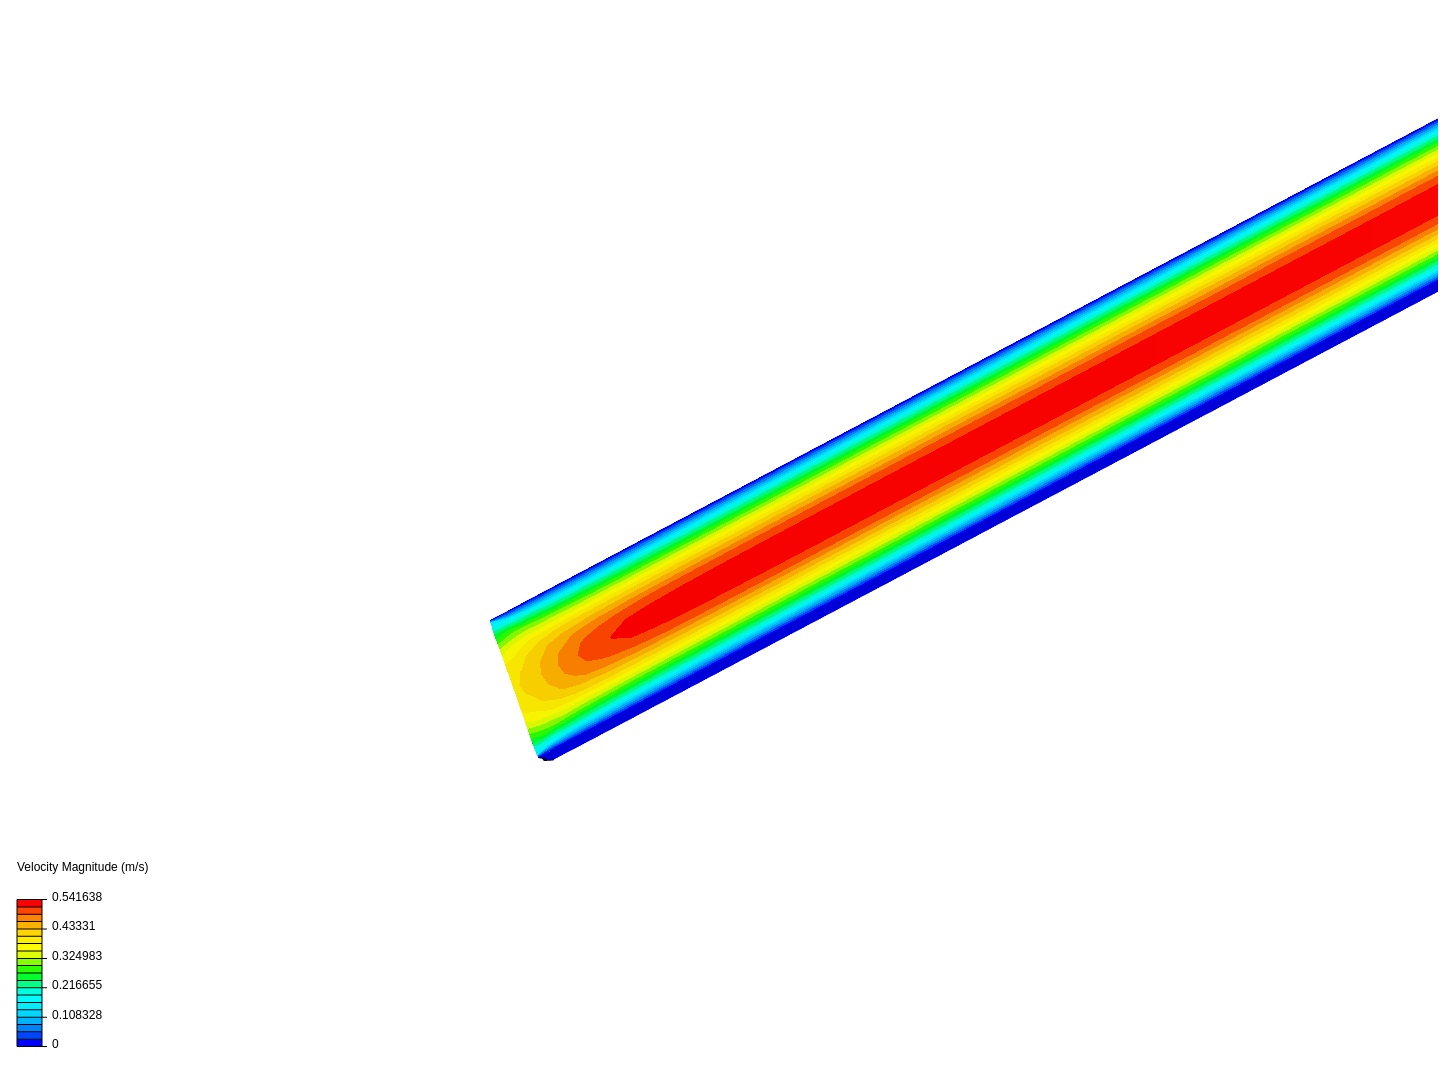 Week8: Demo for laminar flow in a pipe image